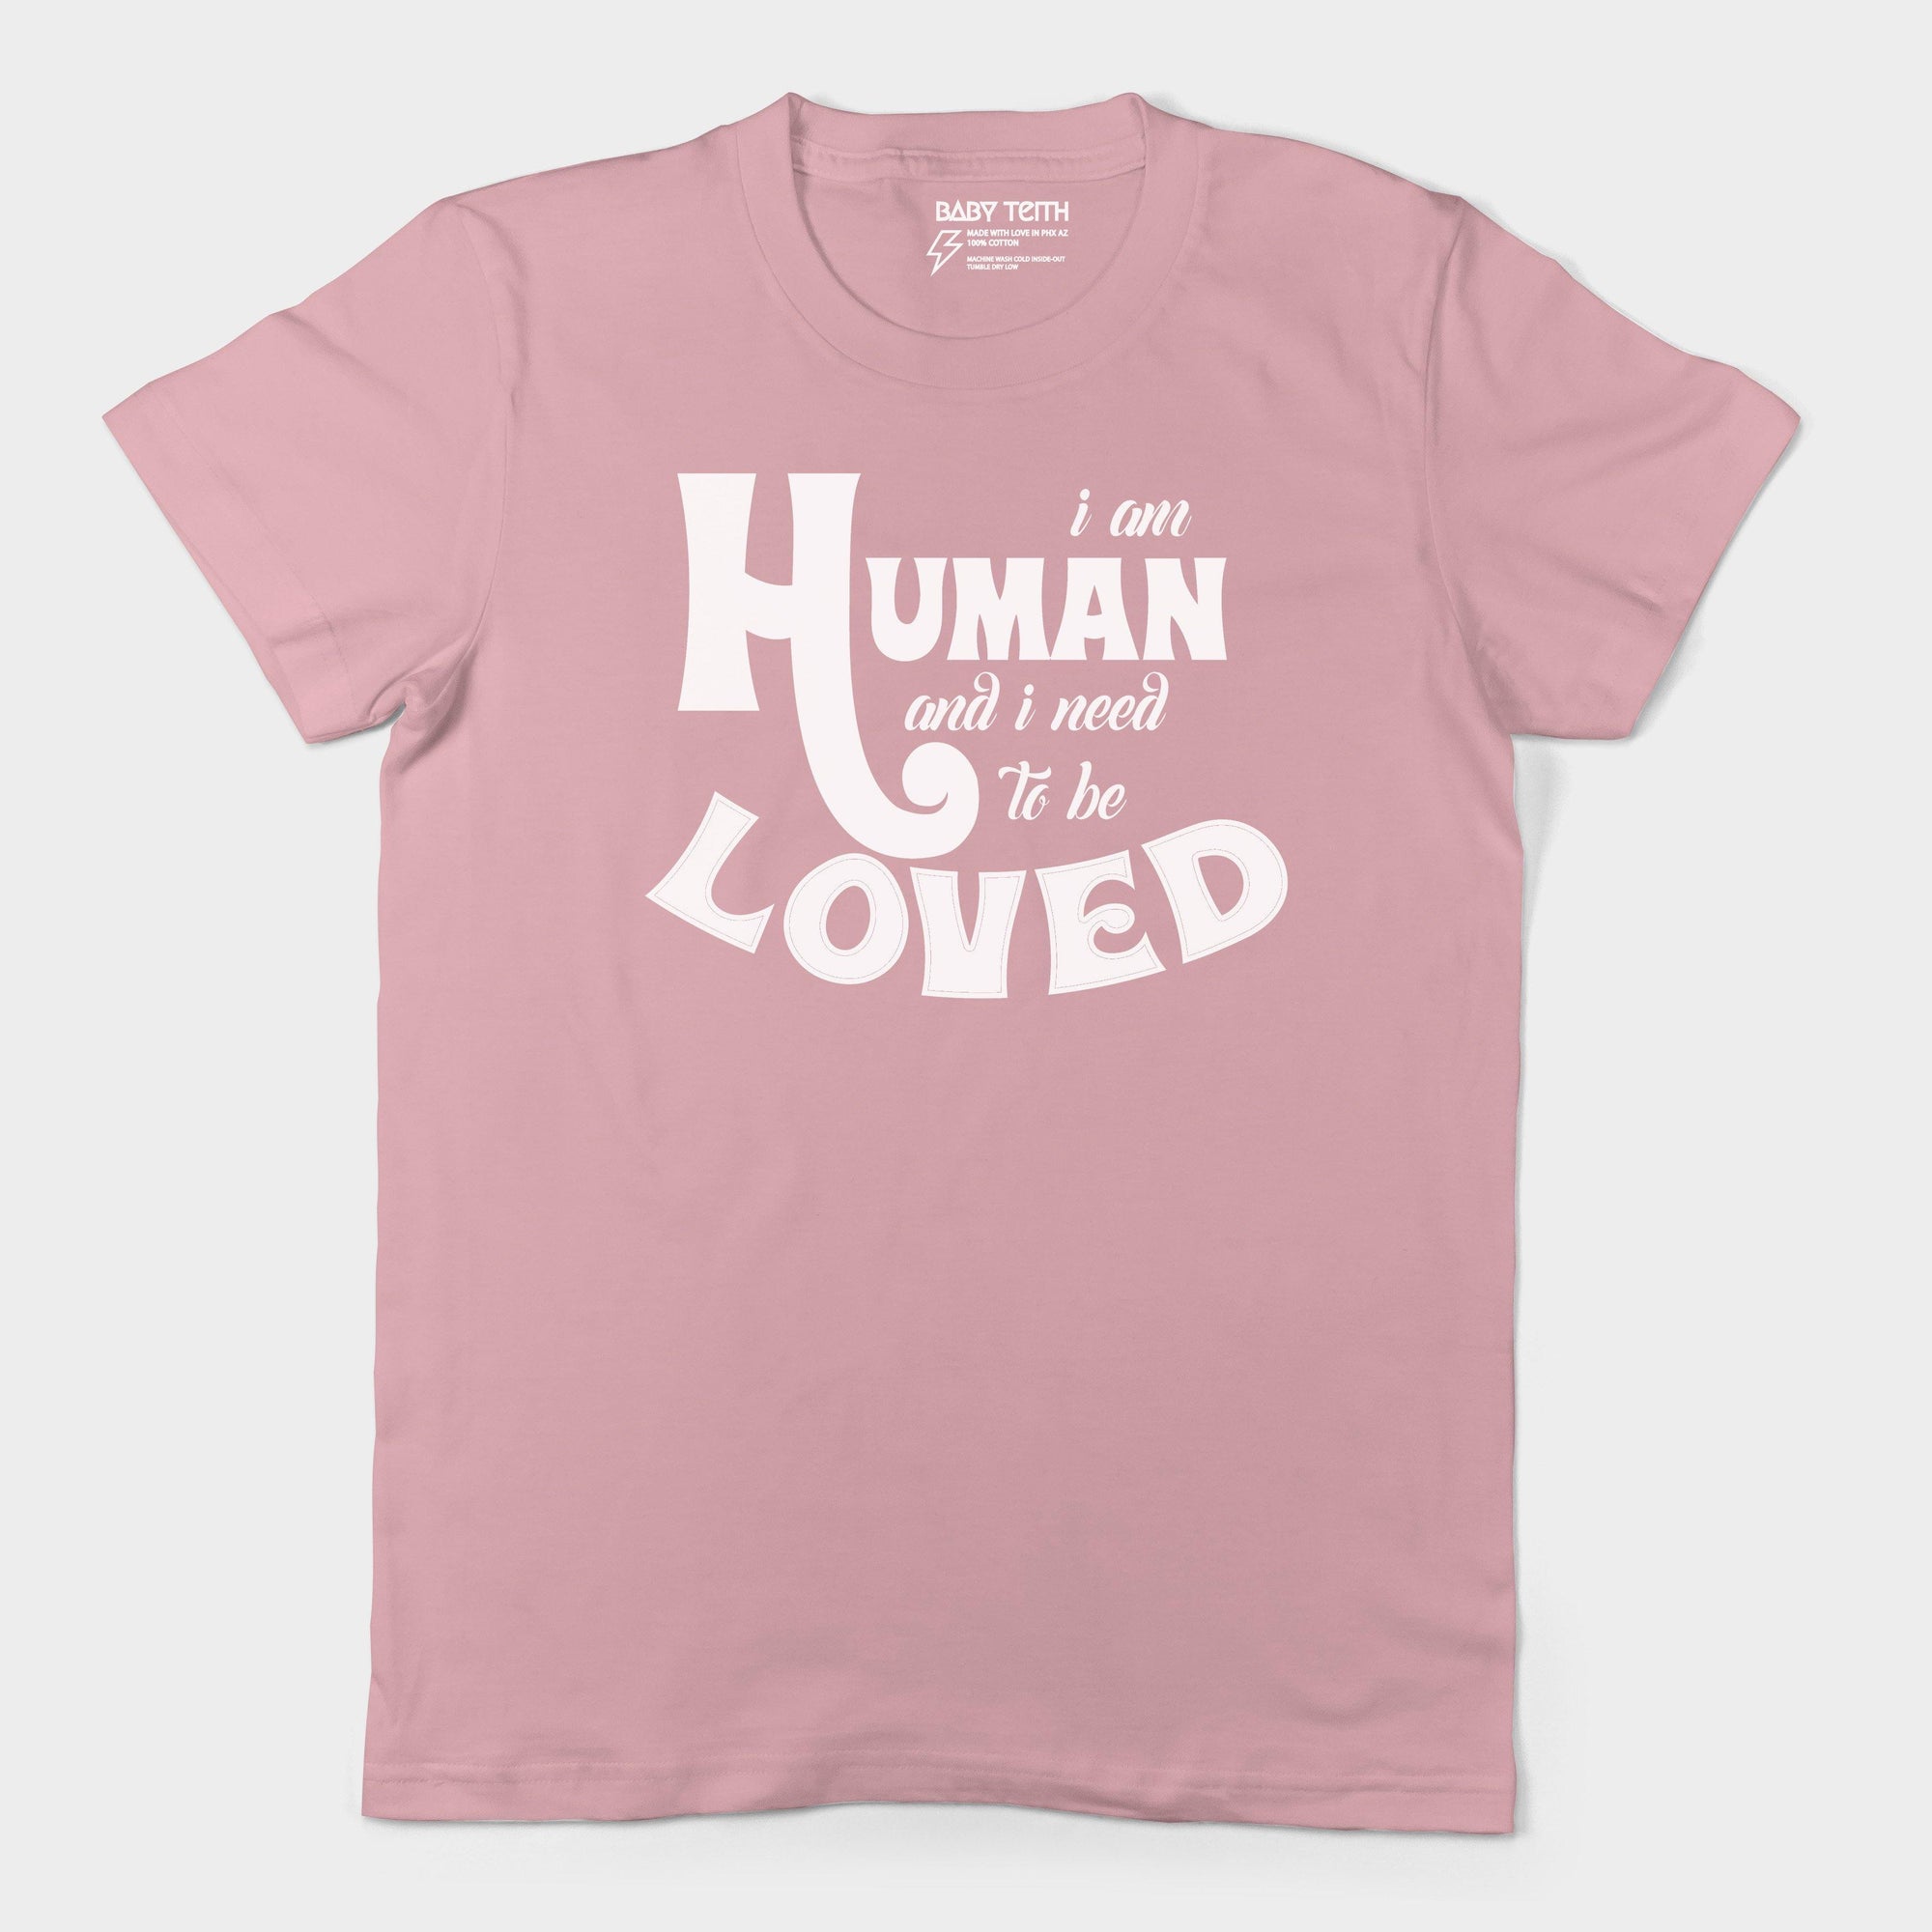 "I am Human" Adult's Unisex Tee (5 Colors) - Baby Teith